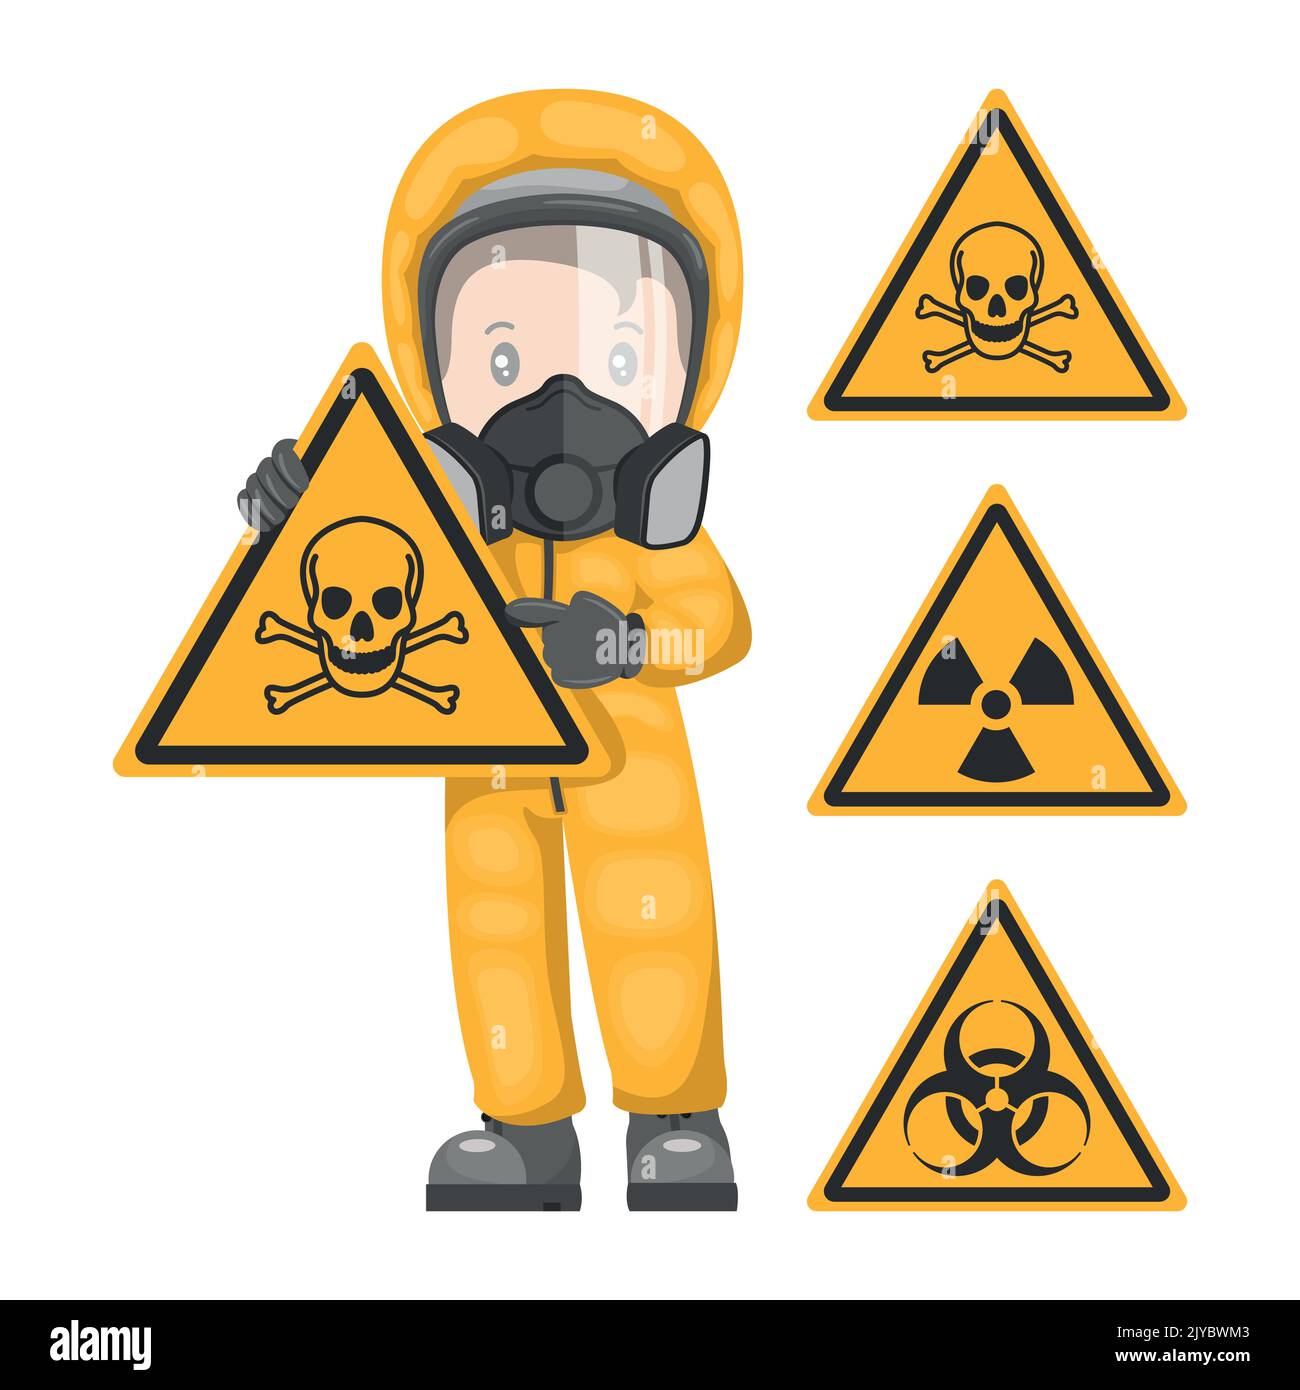 Industrial worker with sign warning of toxic, radioactive and biological material hazards. Caution pictogram and icon. Industrial safety and occupatio Stock Vector